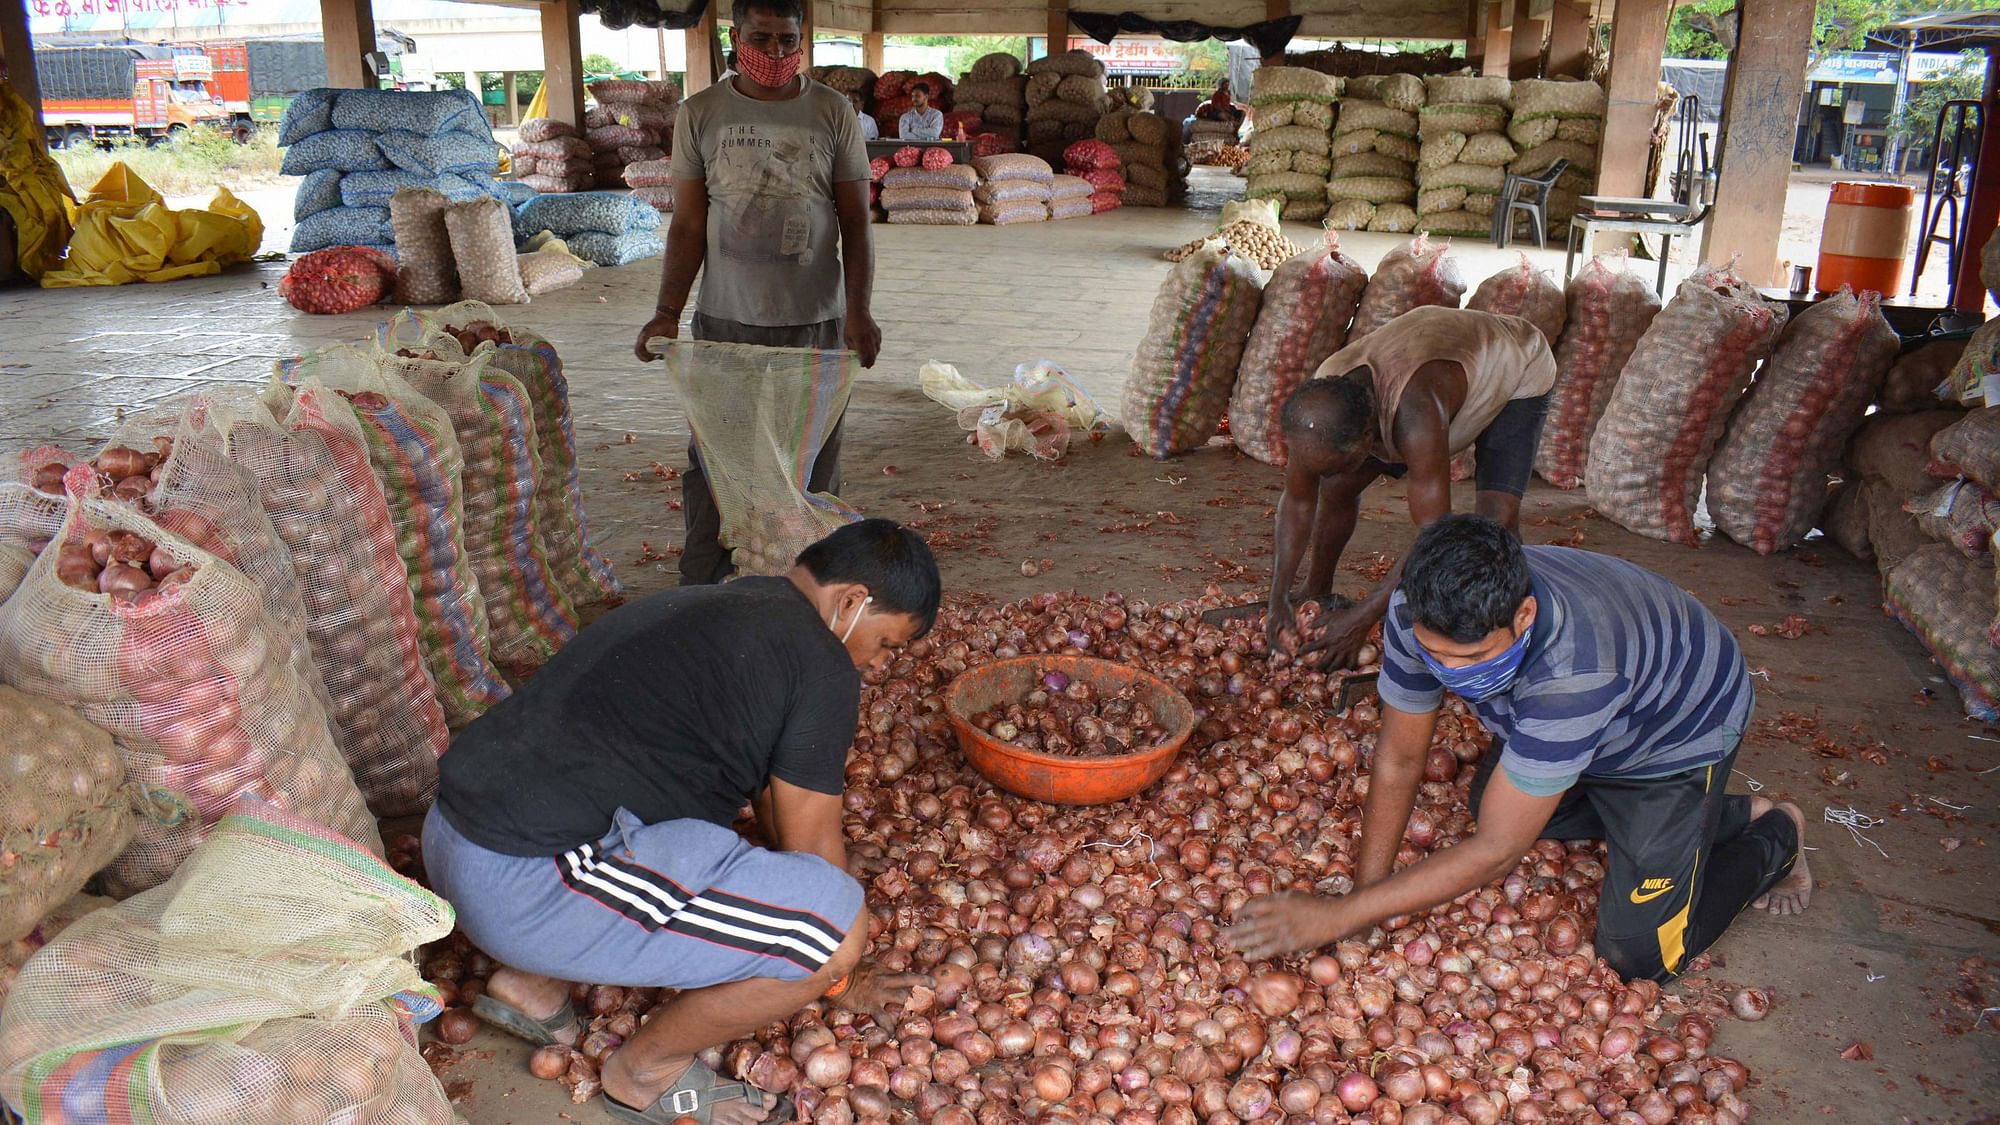 Onions worth Rs 30 crore are stuck at the Mumbai port. Image used for representational purpose.